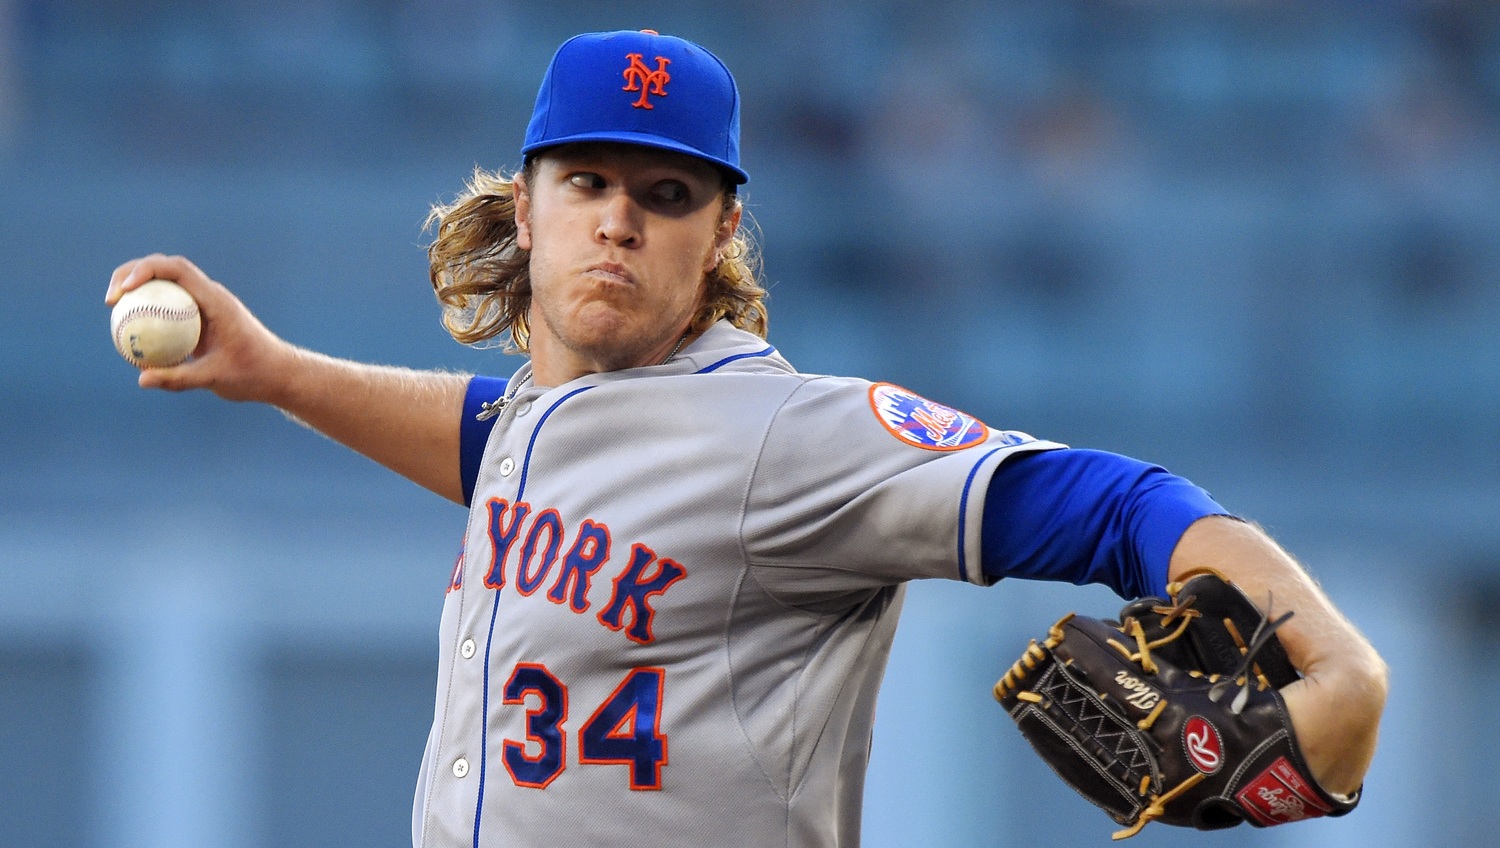 Noah Syndergaard Game of Thrones cameo (video) - Sports Illustrated